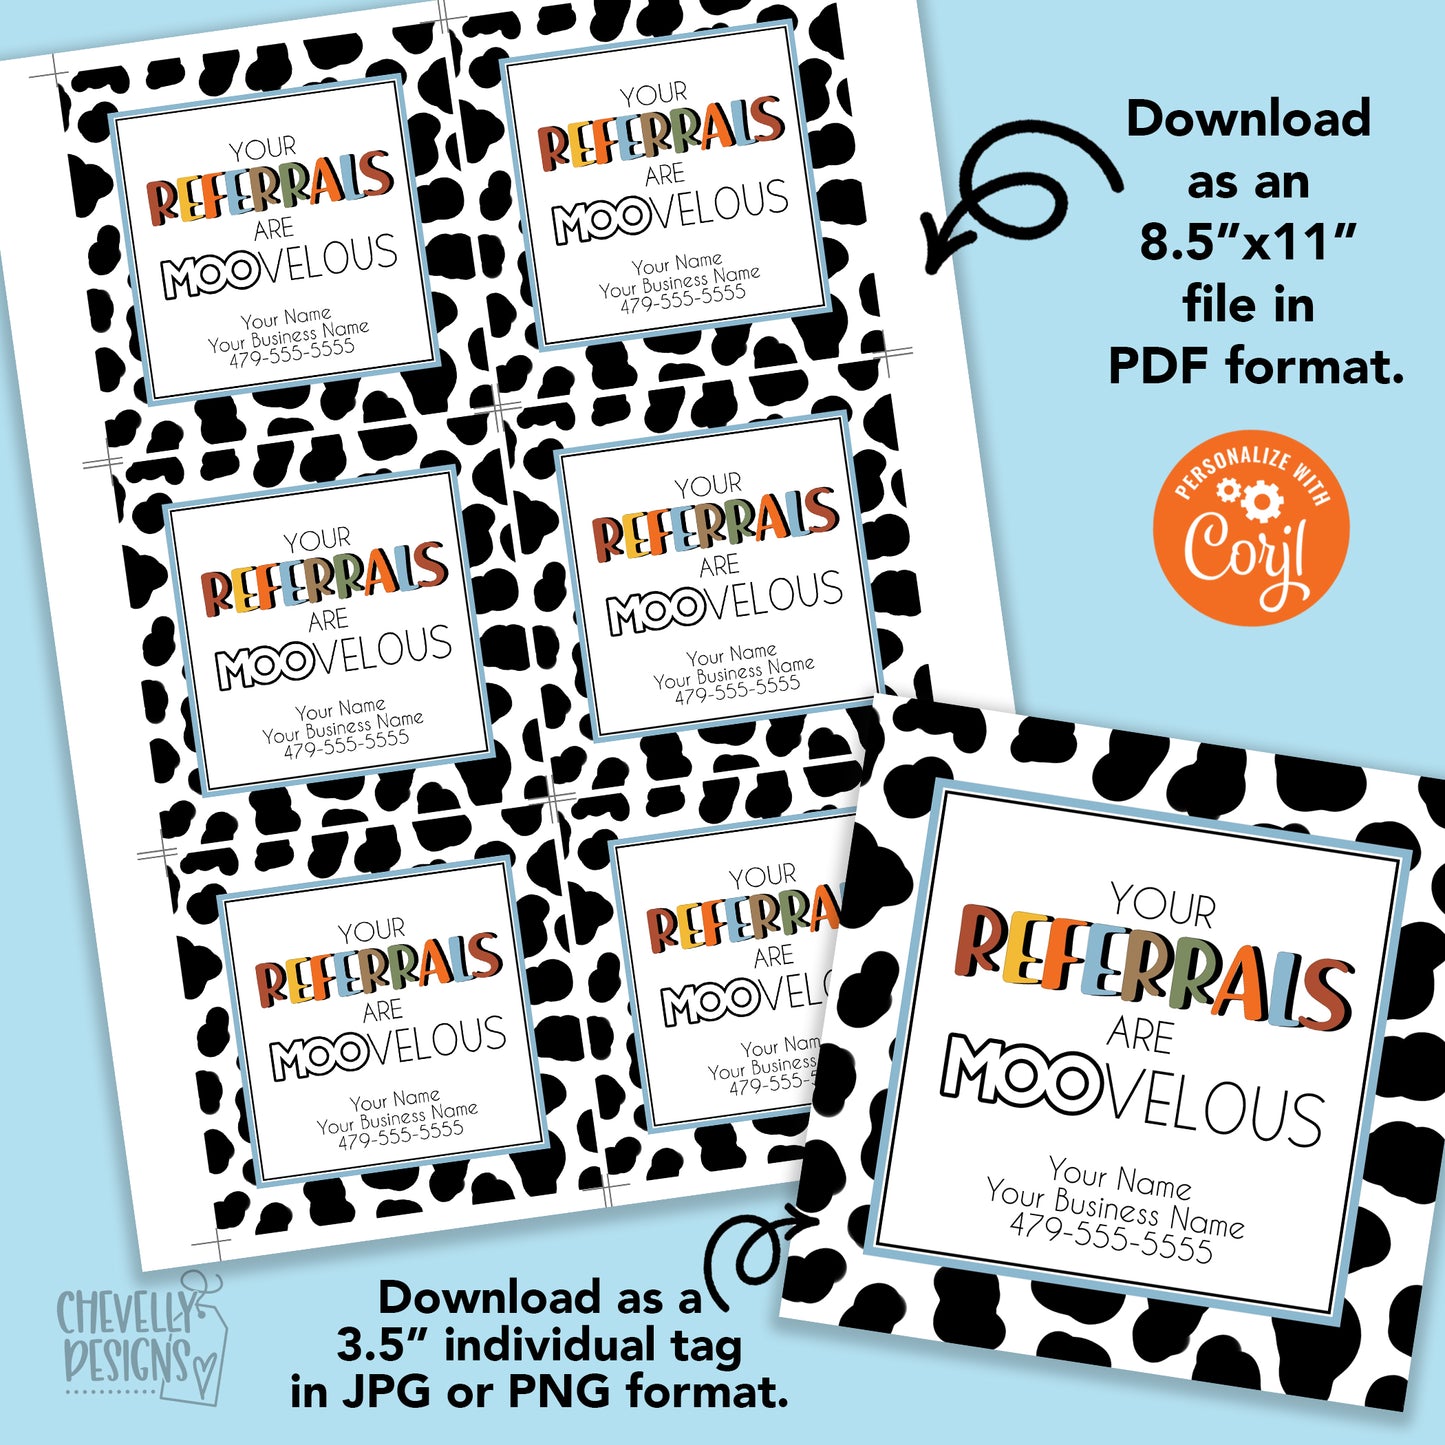 EDITABLE - Your Referrals are MOO-velous - Business Marketing Gift Tags - Printable Digital File